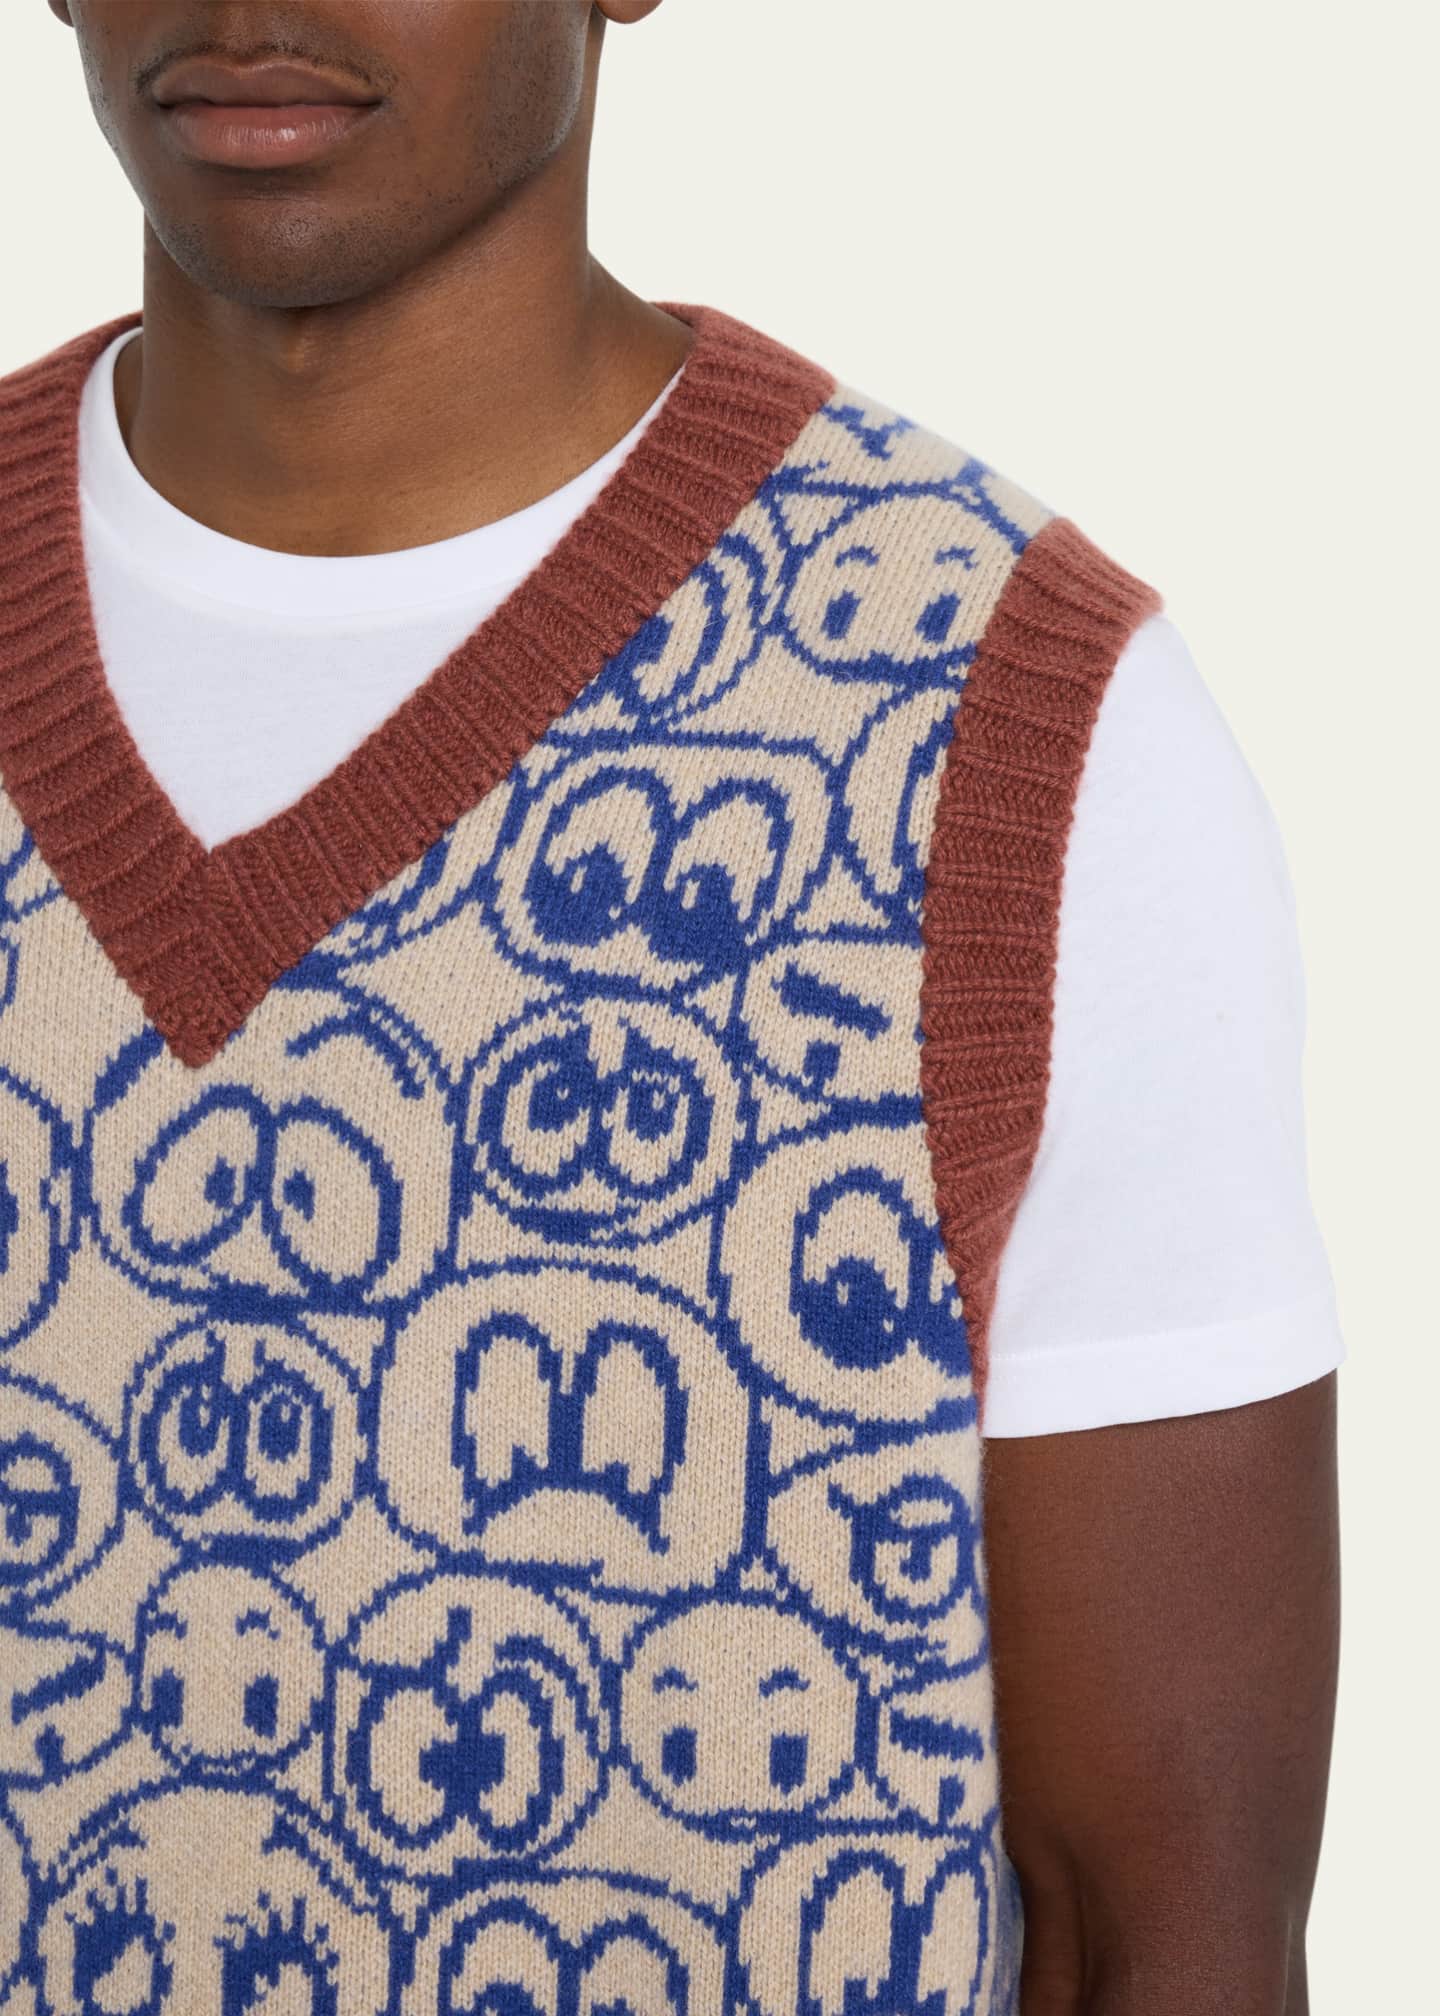 The Elder Statesman Men's Smiley Face Cashmere Sweater Vest, Hickory/Blue Jay/, Men's, Small, Sweaters Cashmere Sweaters